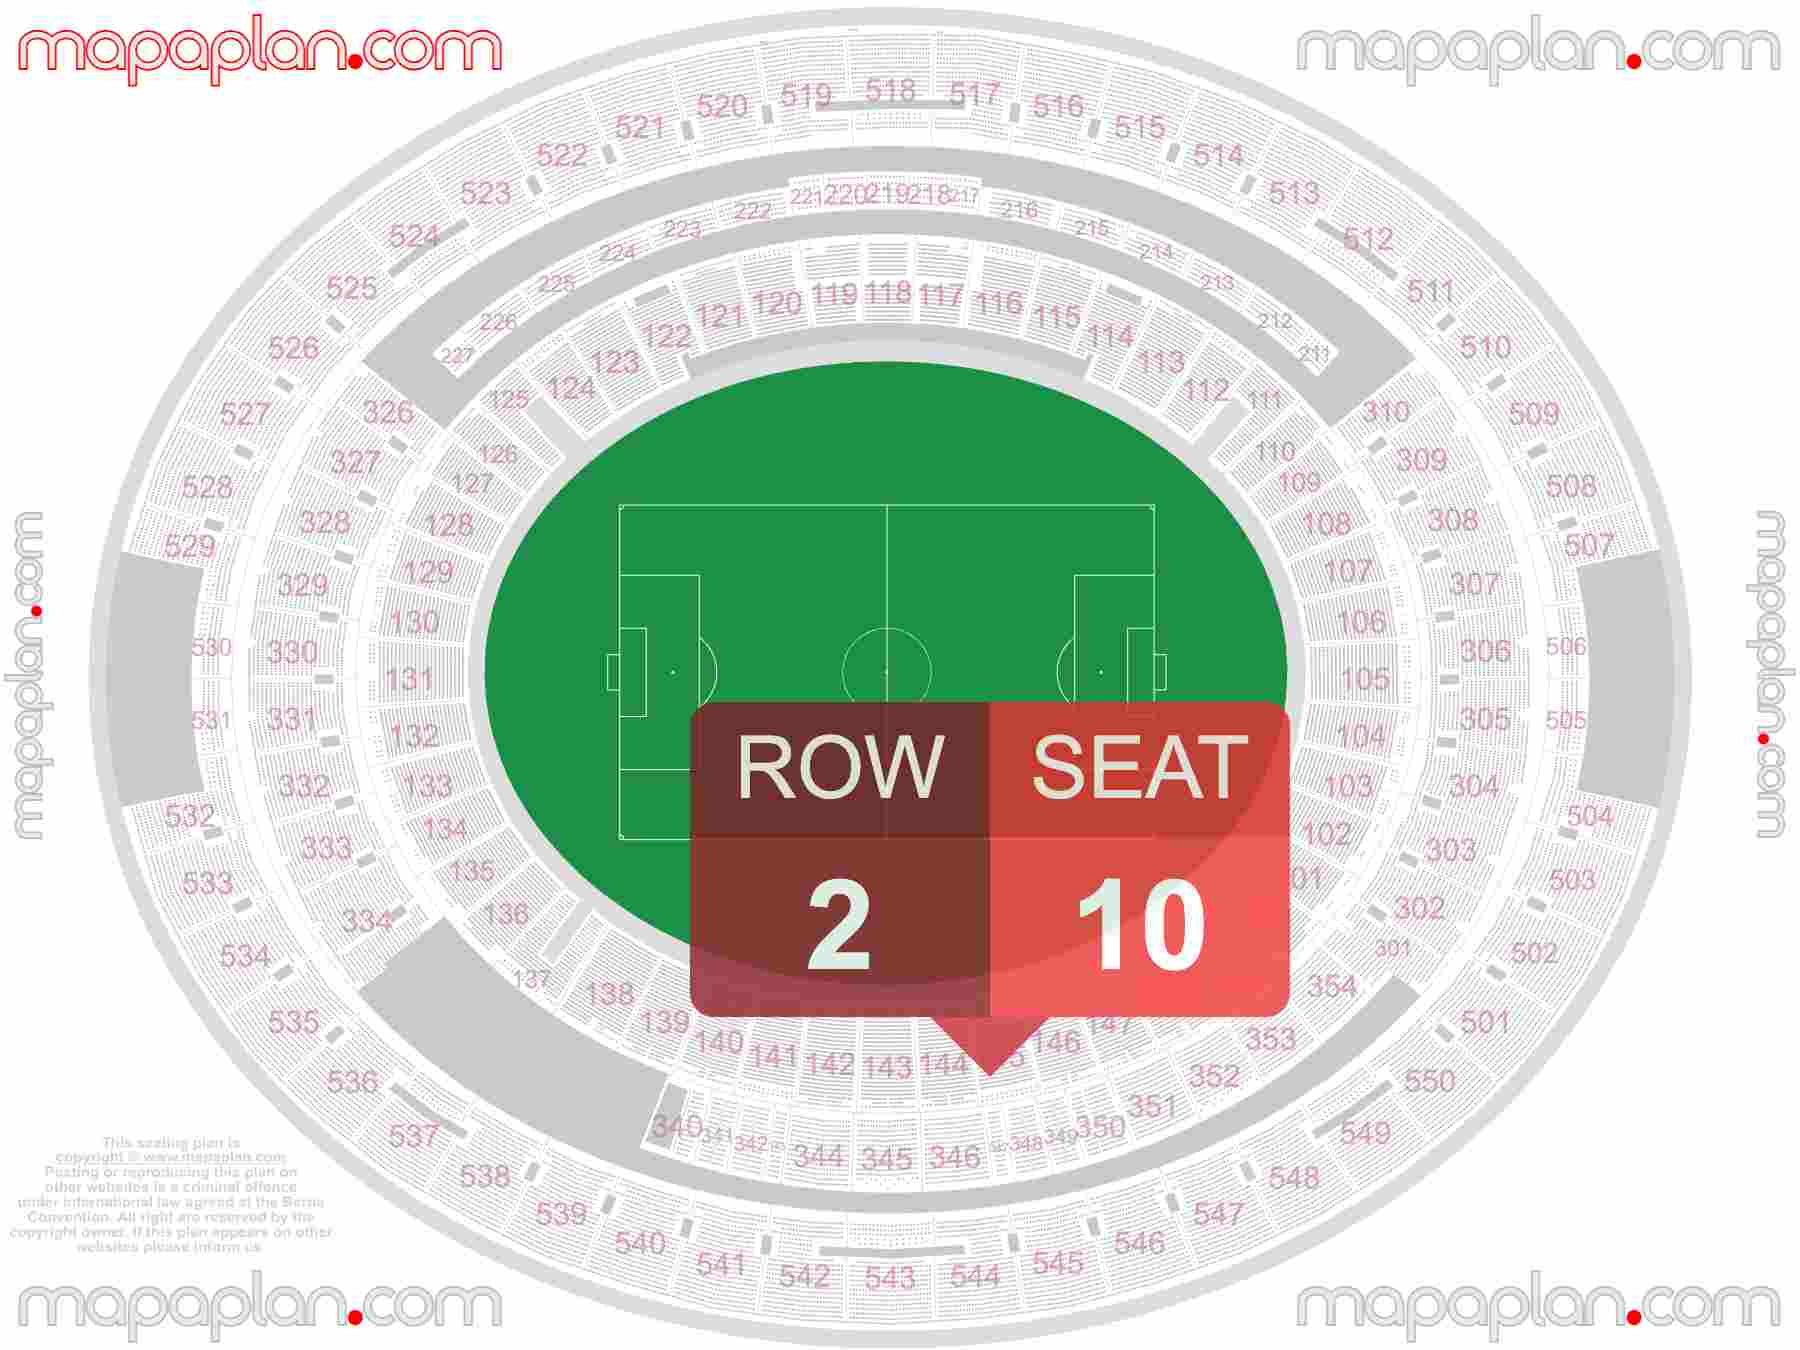 Perth Optus Stadium seating map Soccer football seating map with exact section numbers showing best rows and seats selection 3d layout - Best interactive seat finder tool with precise detailed location data